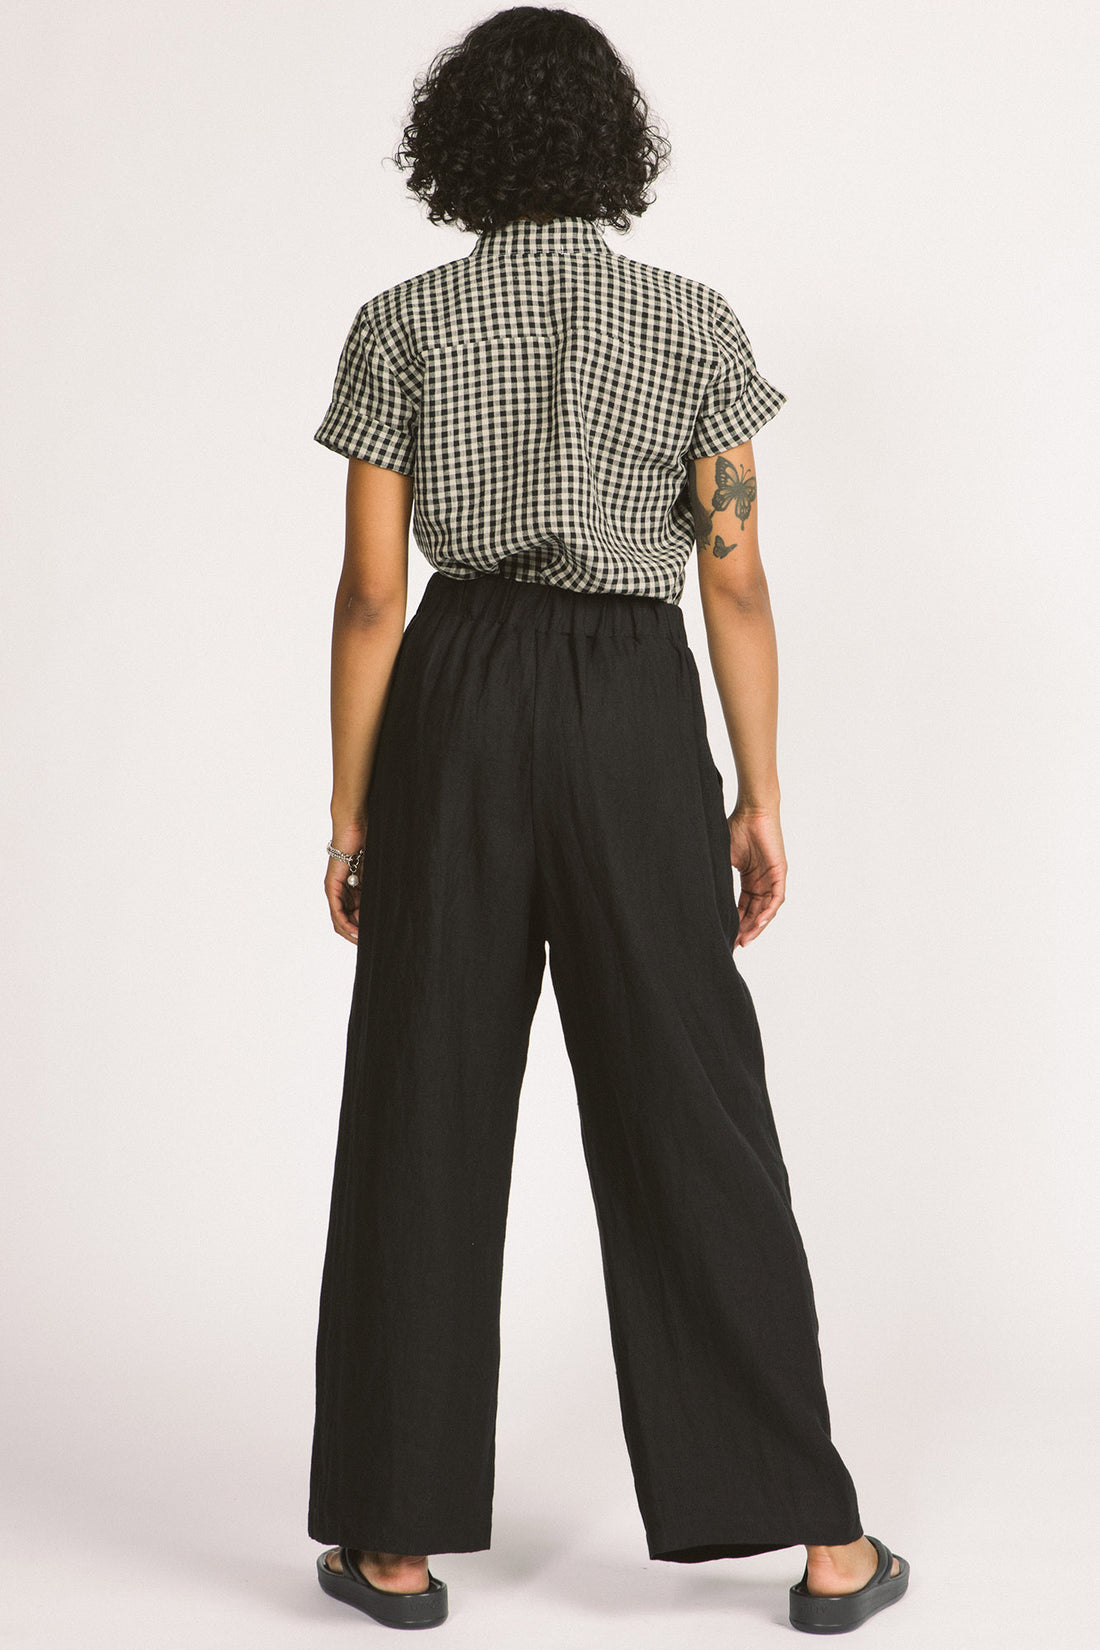 Romy Pants by Allison Wonderland, Black, back view,wide legs, full length, flat waistband with elastic at the side, pleats, pockets, eco-fabric, linen, sizes 2-12, made in Vancouver